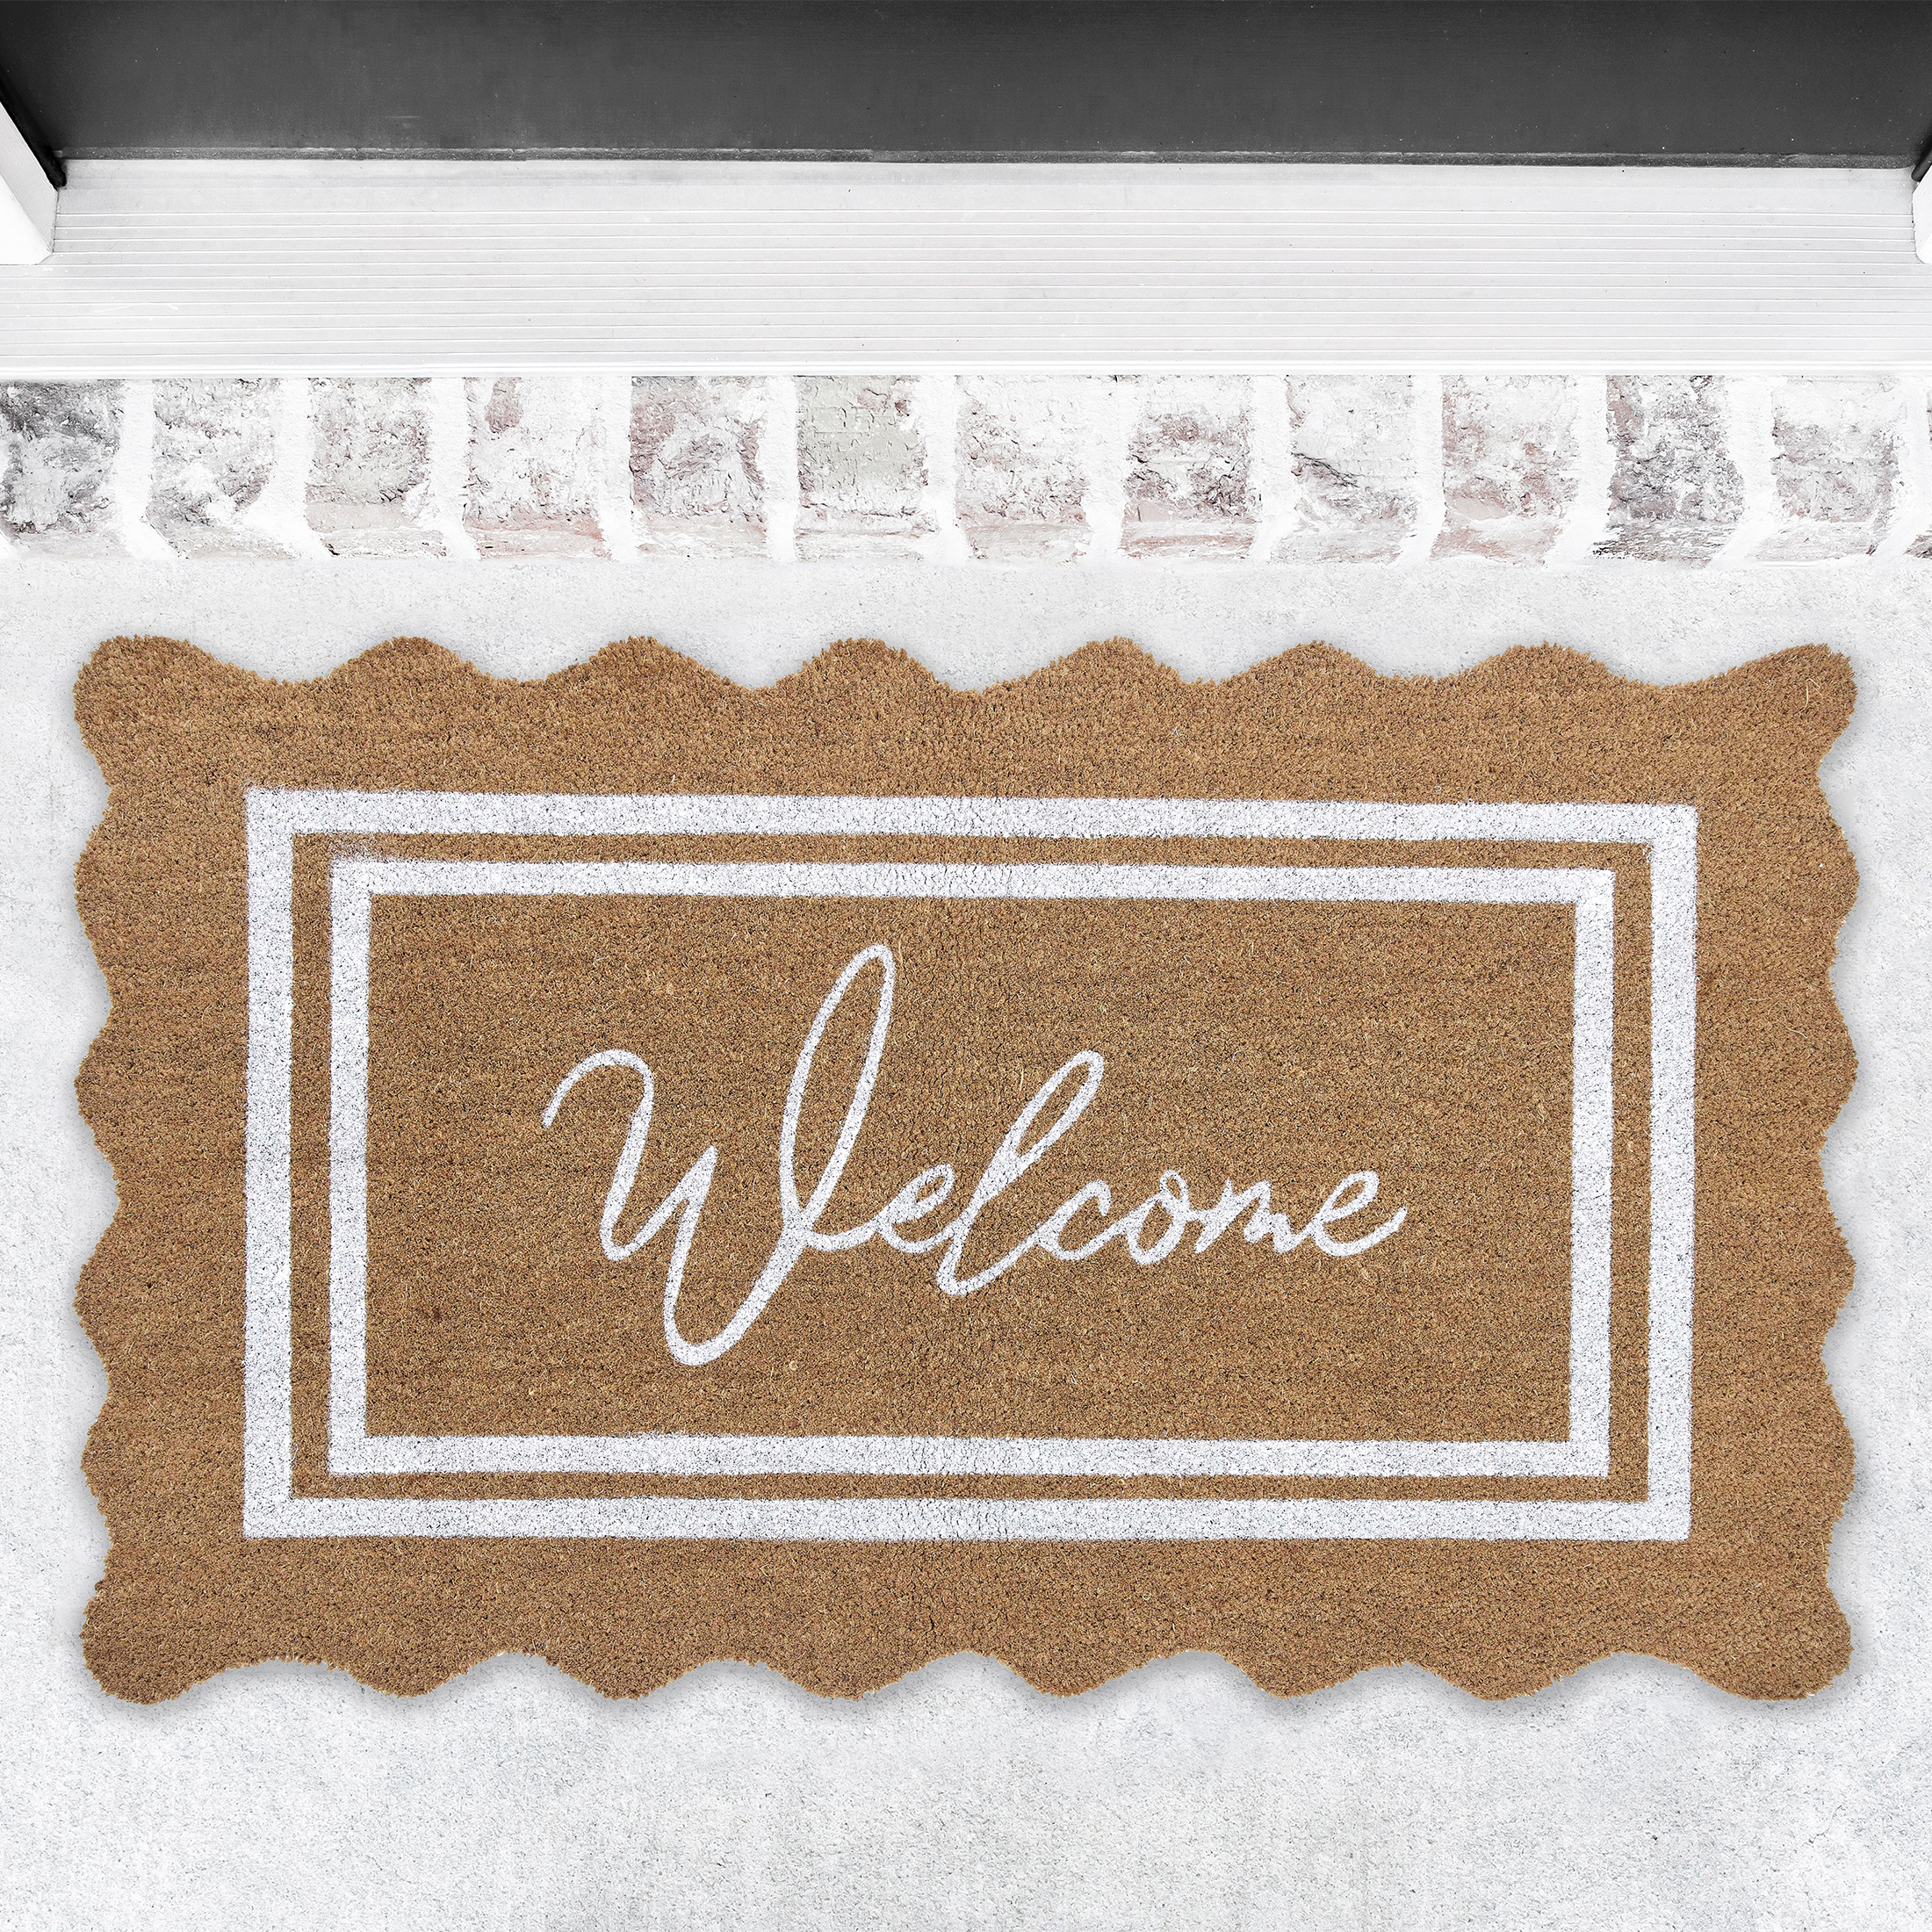 My Texas House Welcome Natural Scalloped Edge and Border Outdoor Coir Doormat, 18" x 30" - image 2 of 7